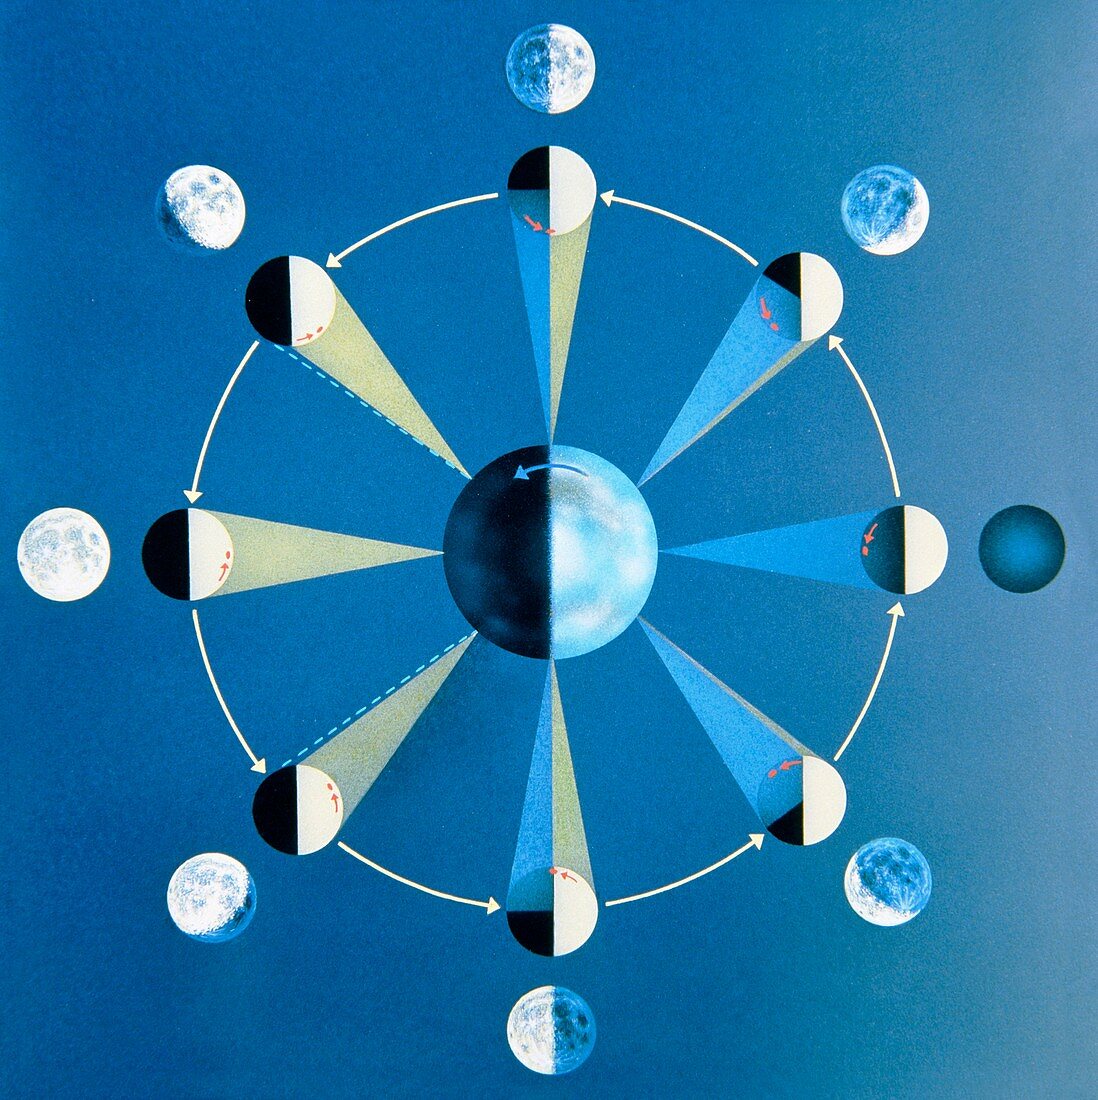 Artwork showing the phases of the Moon